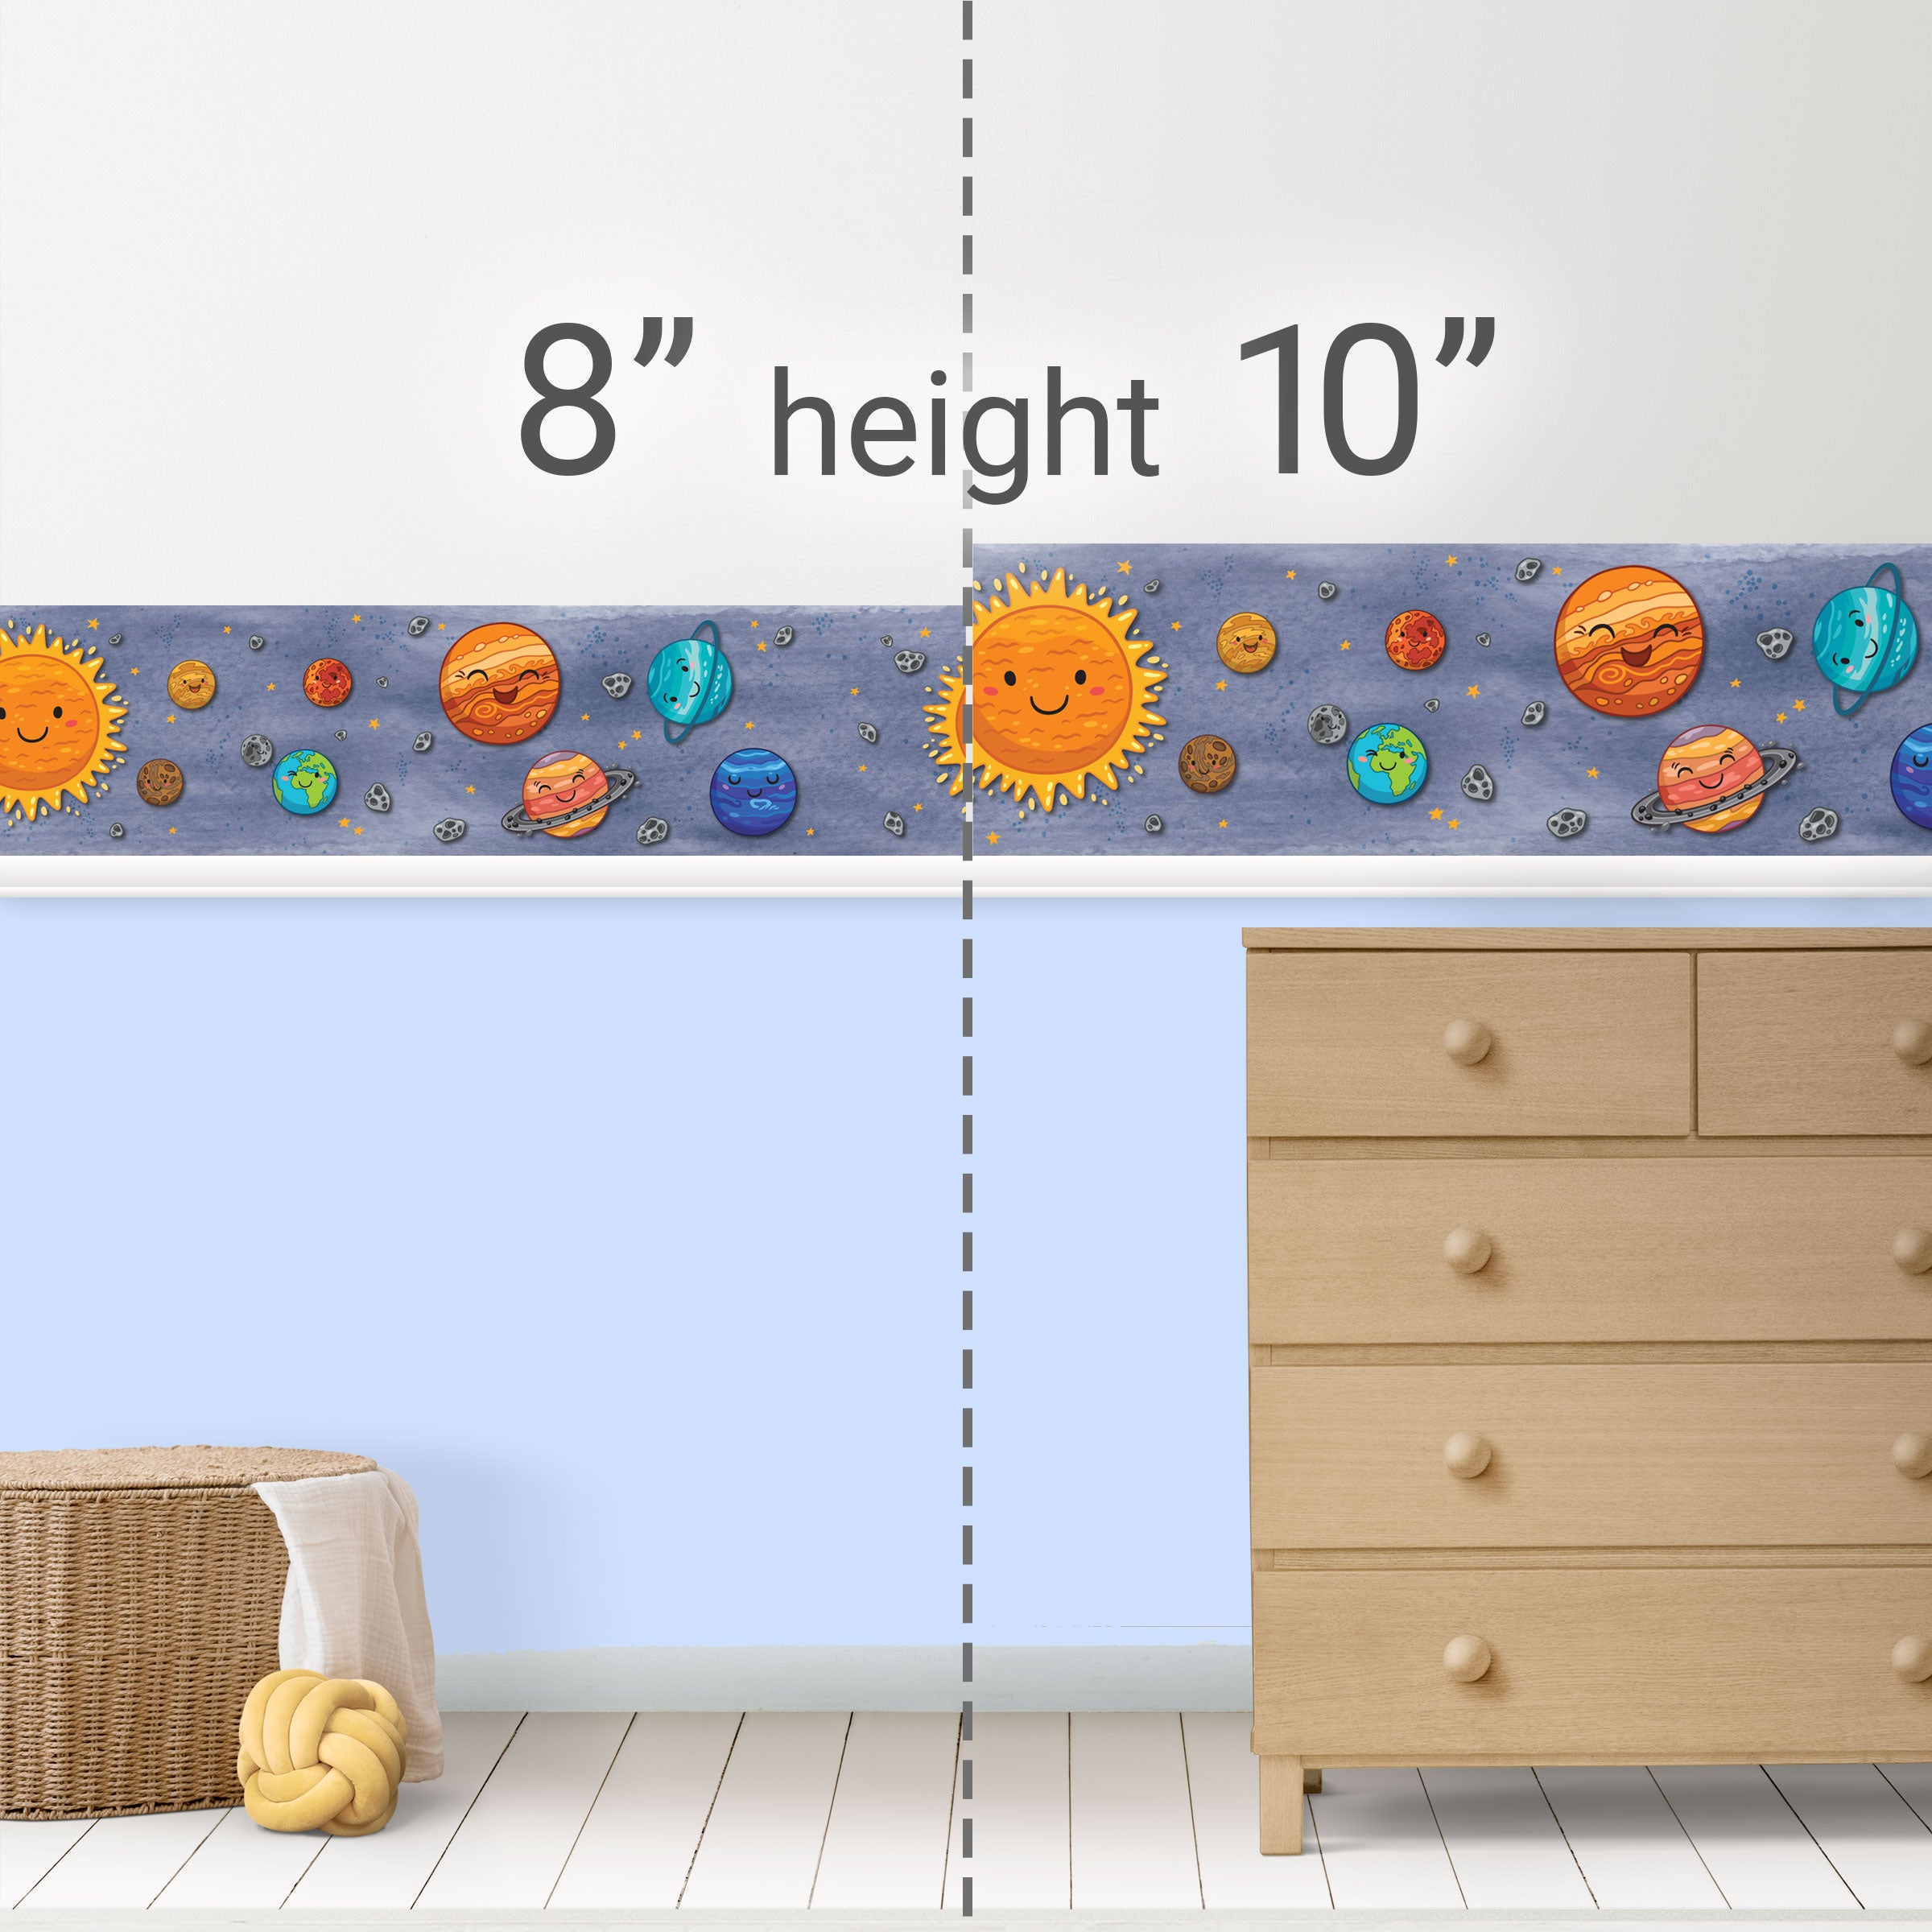 GB90280g8 Grace & Gardenia Smiling Solar System Peel and Stick Wallpaper Border 8in Height x 18ft Long, Blue Orange Yellow